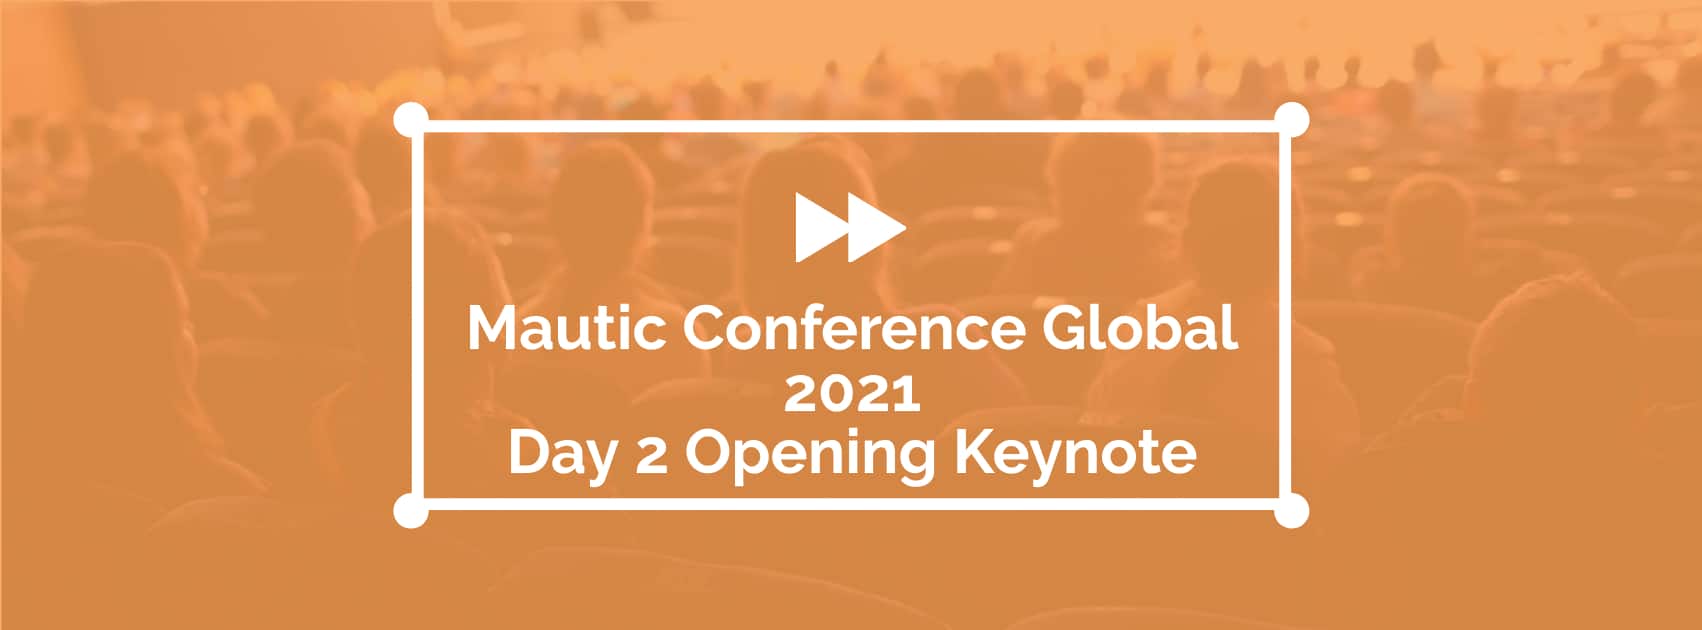 Mautic Conference Global 2021 Day 2 Opening Keynote